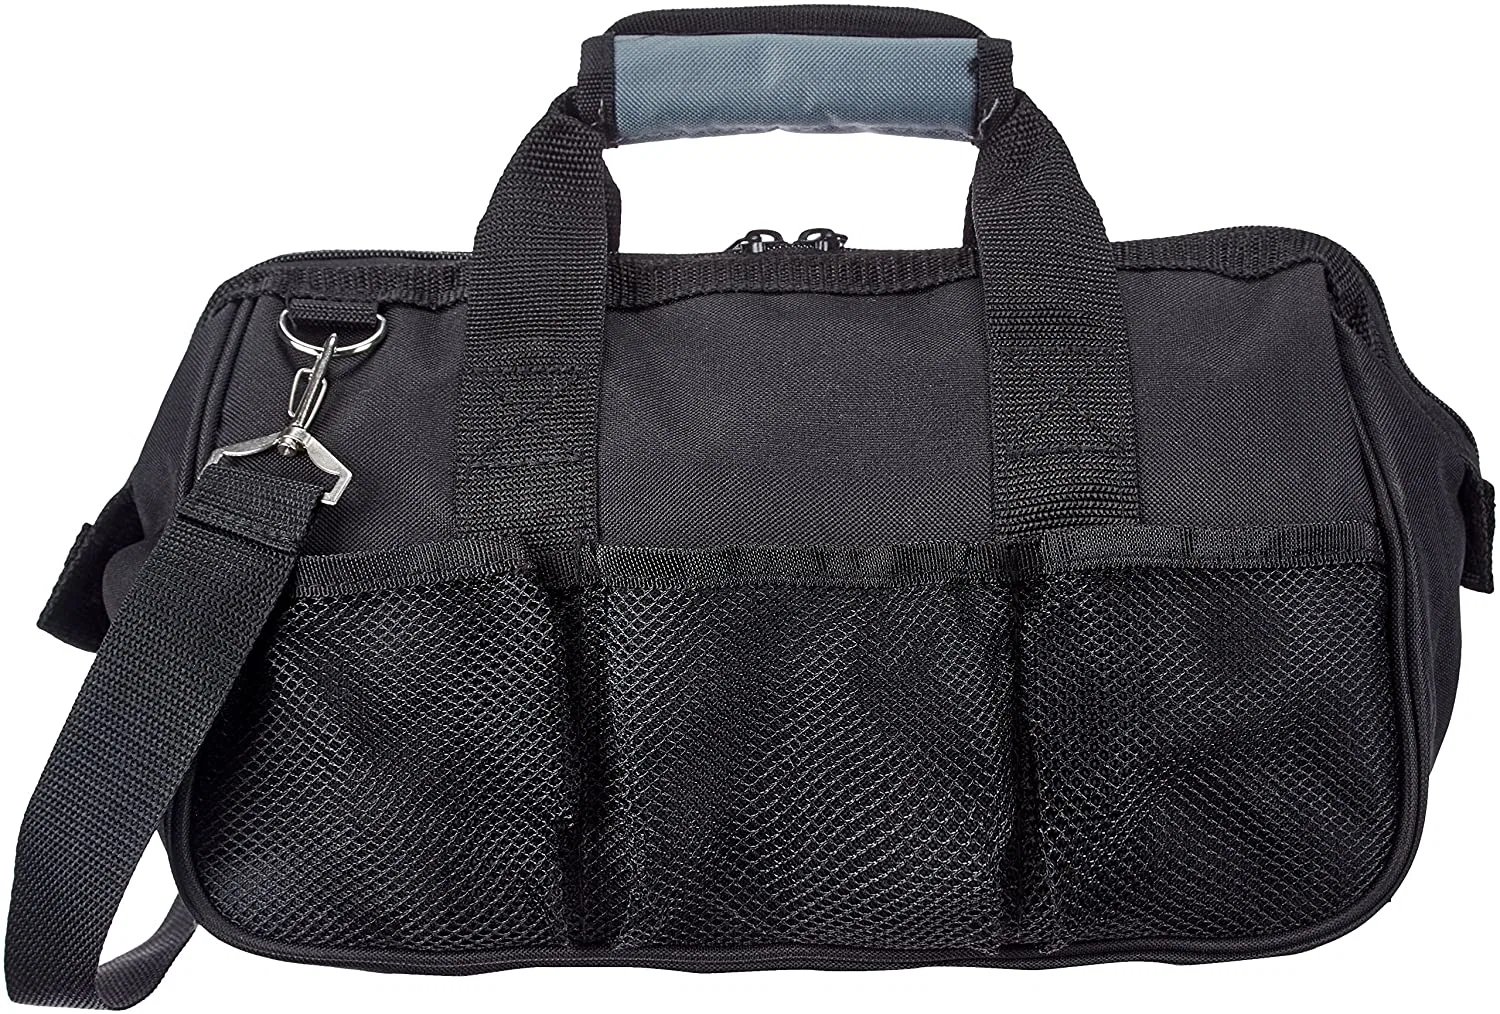 Customize Waterproof Anti-Scratch Tool Bag with Shoulder Strap